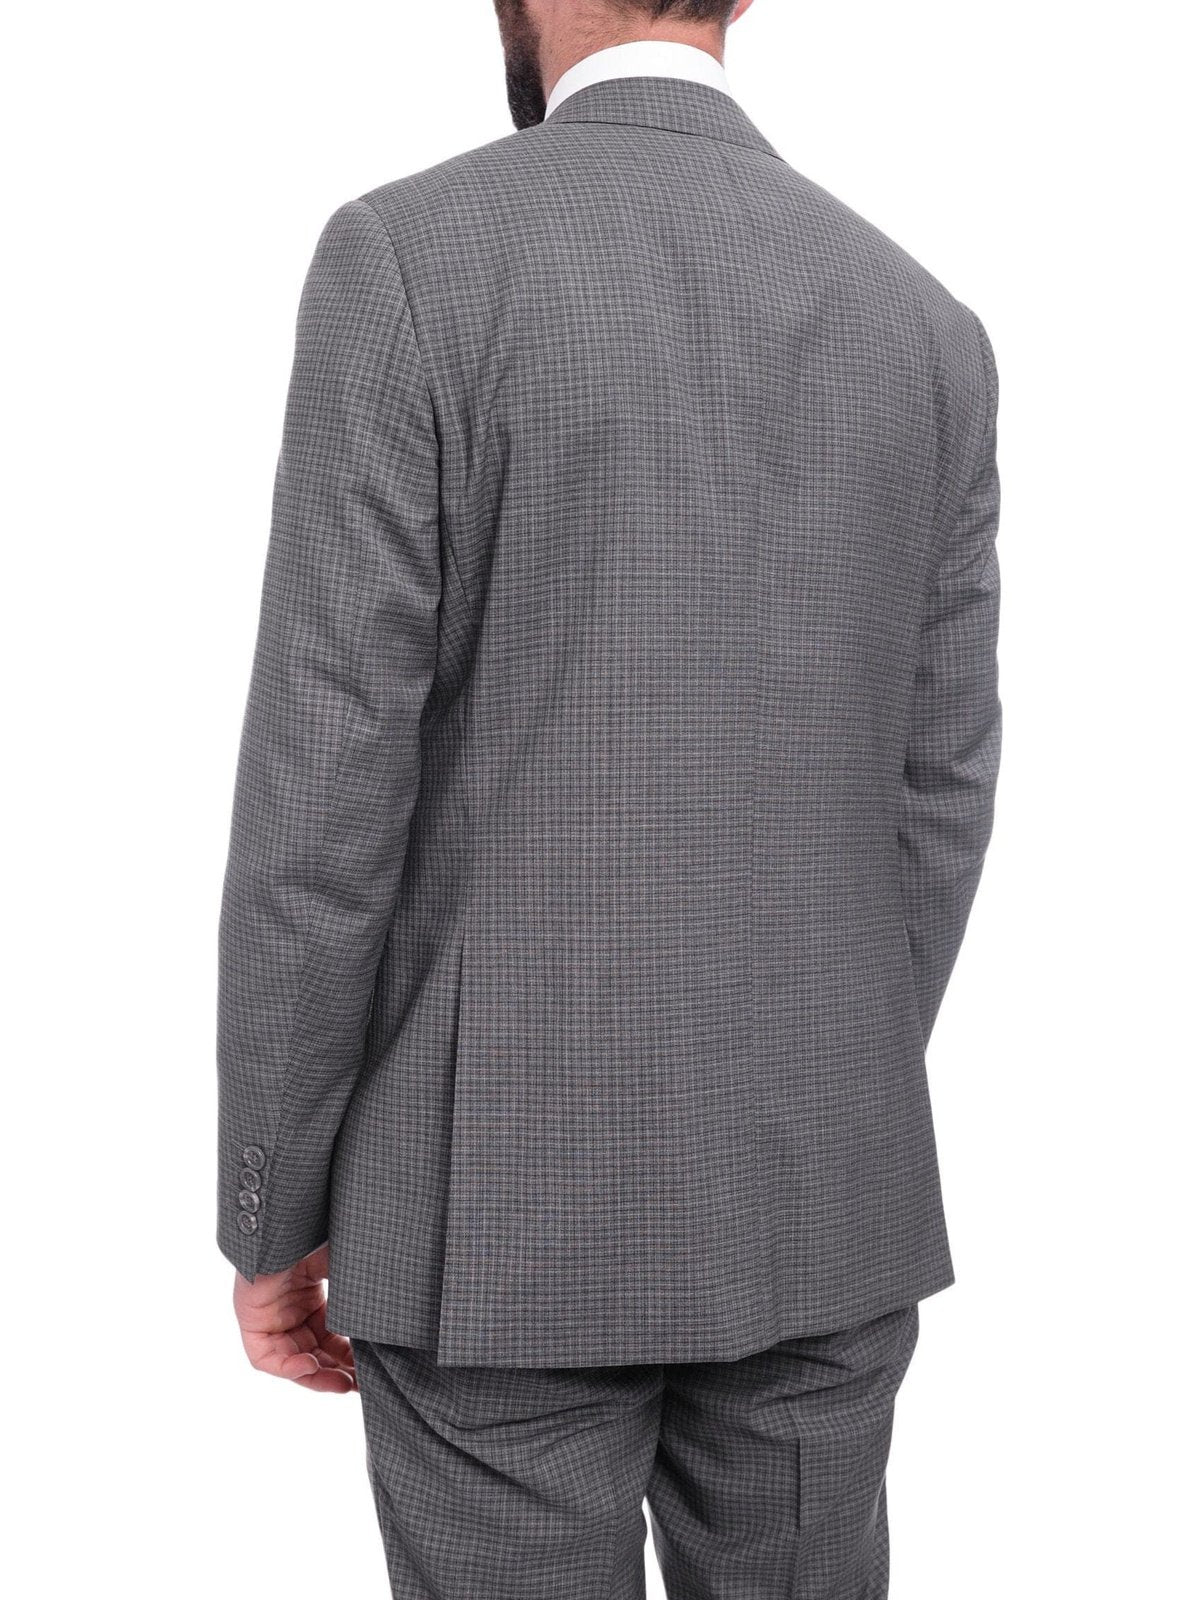 Napoli TWO PIECE SUITS Napoli Slim Fit Gray Check Half Canvassed Marzotto Wool Suit Slanted Pockets